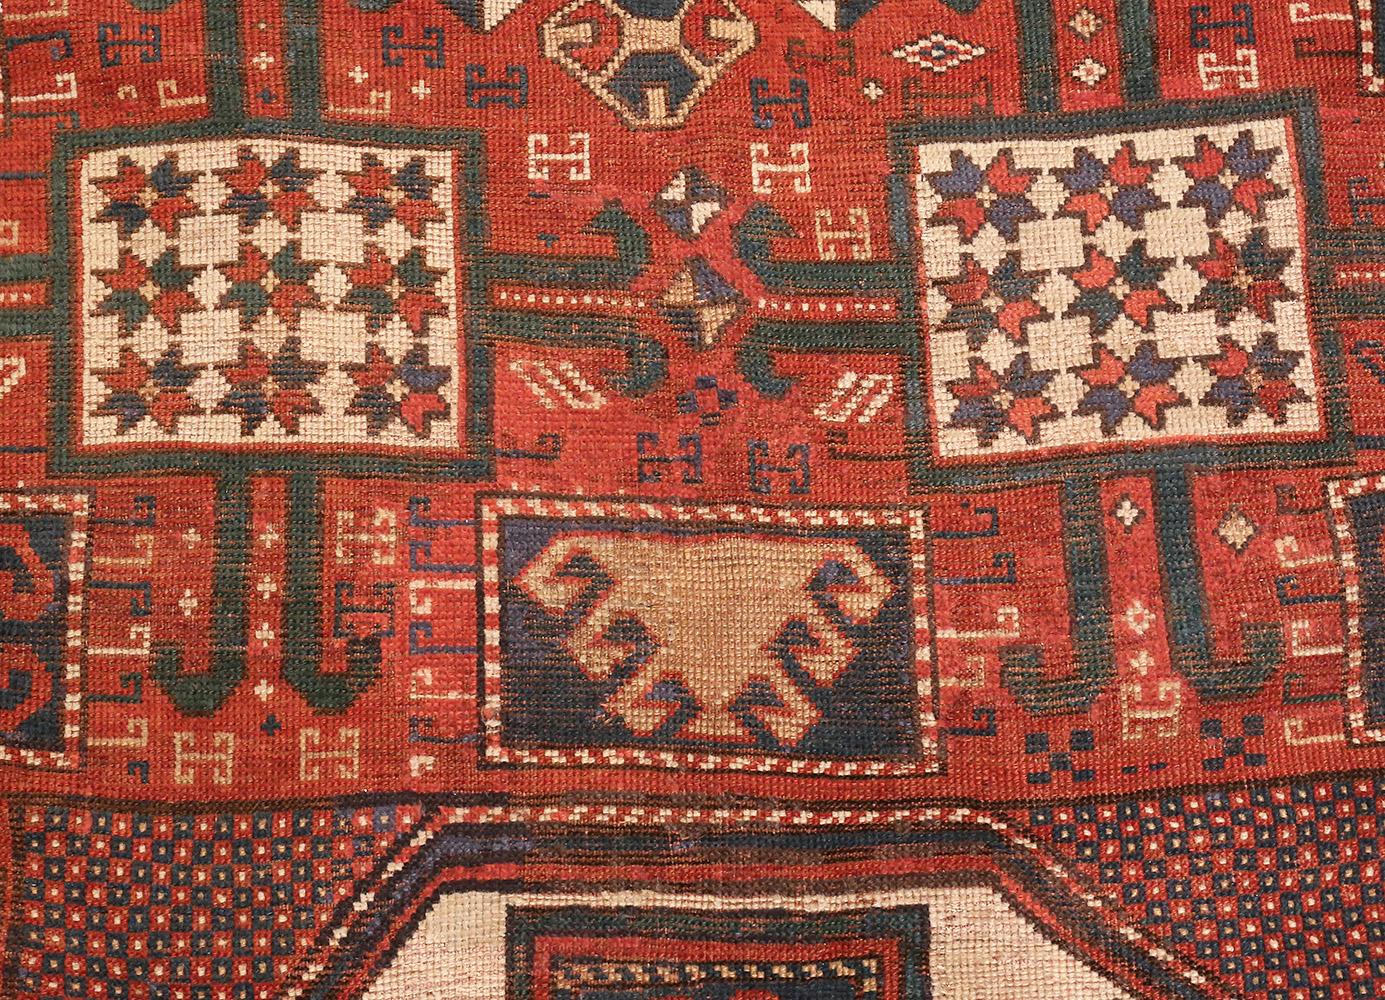 Hand-Knotted Antique Caucasian Karachopf Rug. Size: 5 ft 6 in x 7 ft 5 in (1.68 m x 2.26 m)